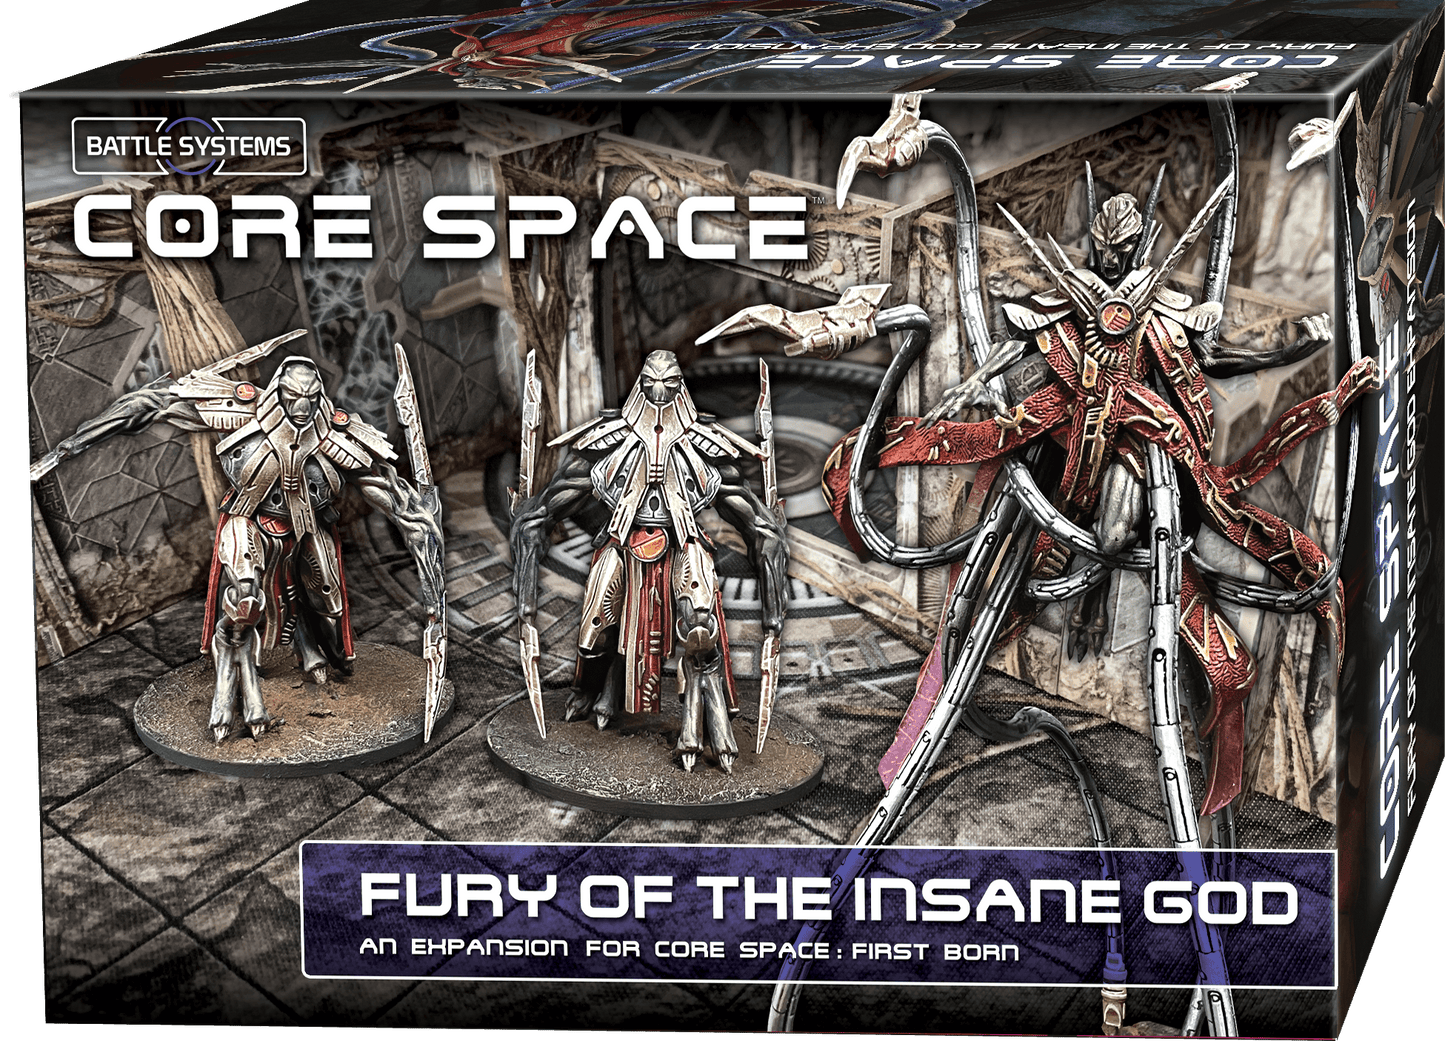 Battle Systems: CORE SPACE FURY OF THE INSANE GOD EXPANSION